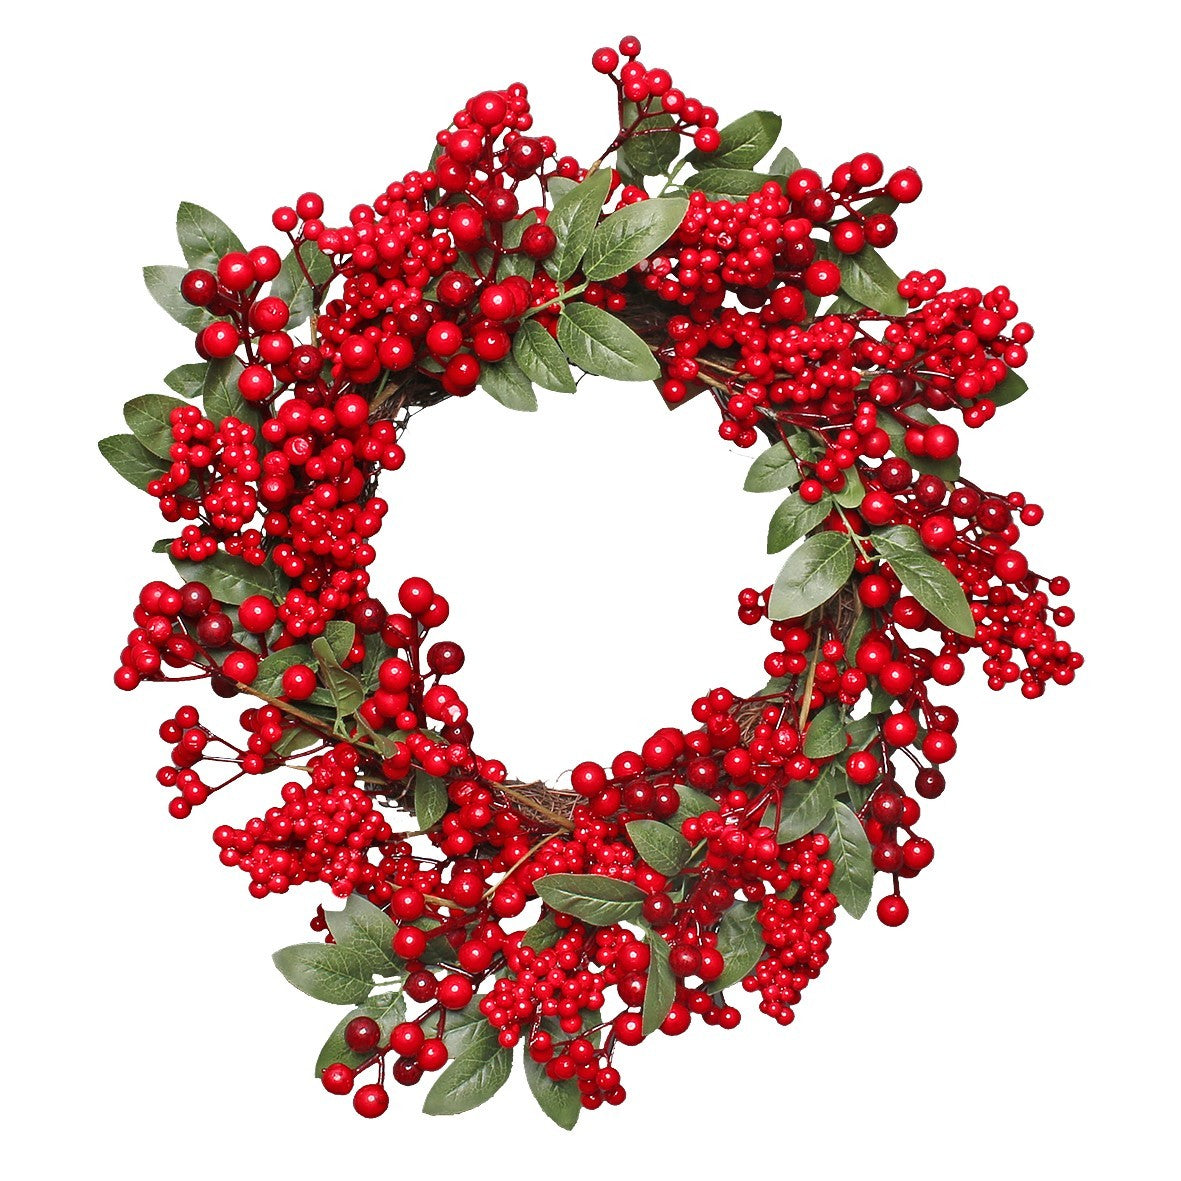 View Red Berry and Leaves Wreath information